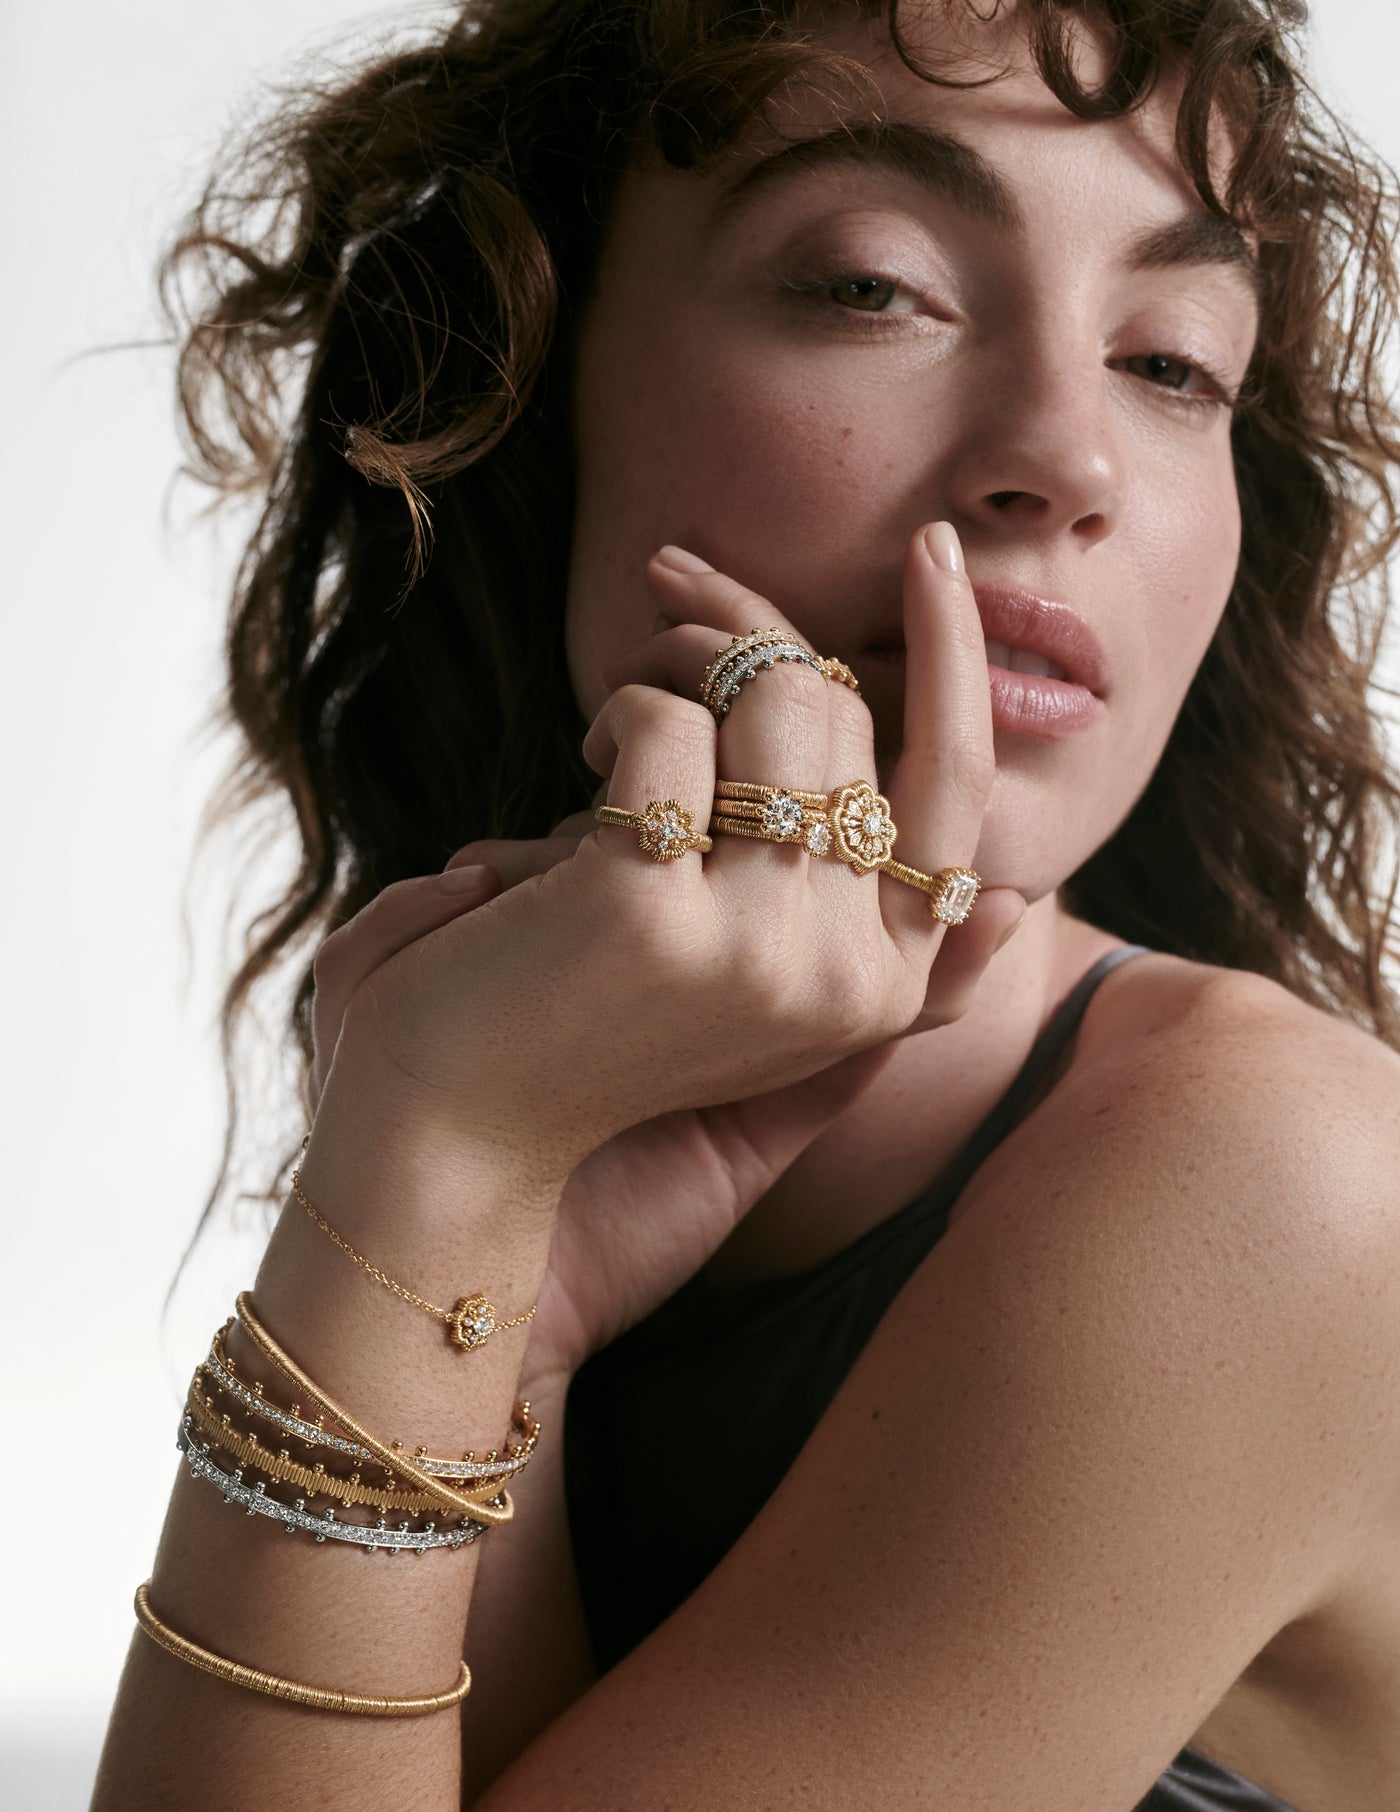 A woman wearing the entire ring and bracelet collection from Oscar Massin